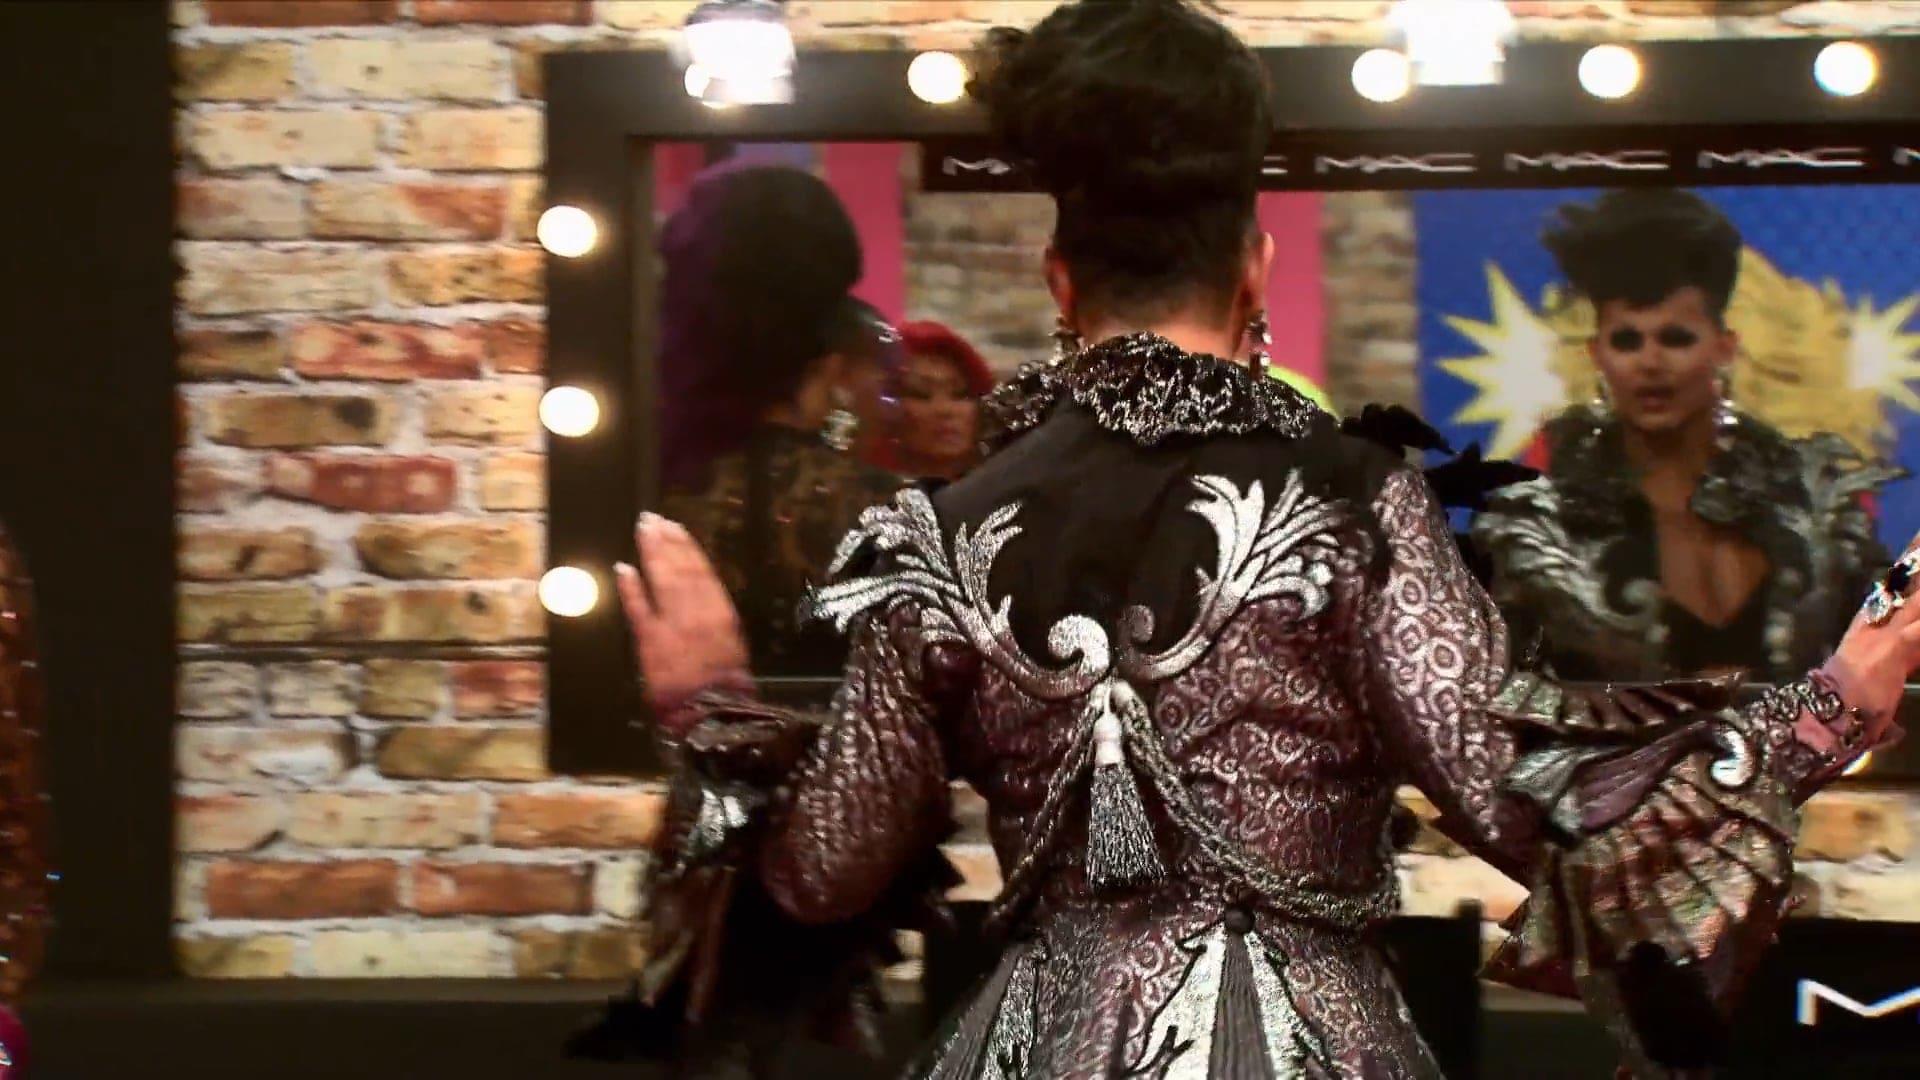 RuPaul's Drag Race All Stars (S01E01): It Takes Two Summary - Season 1 Episode 1 Guide1920 x 1080